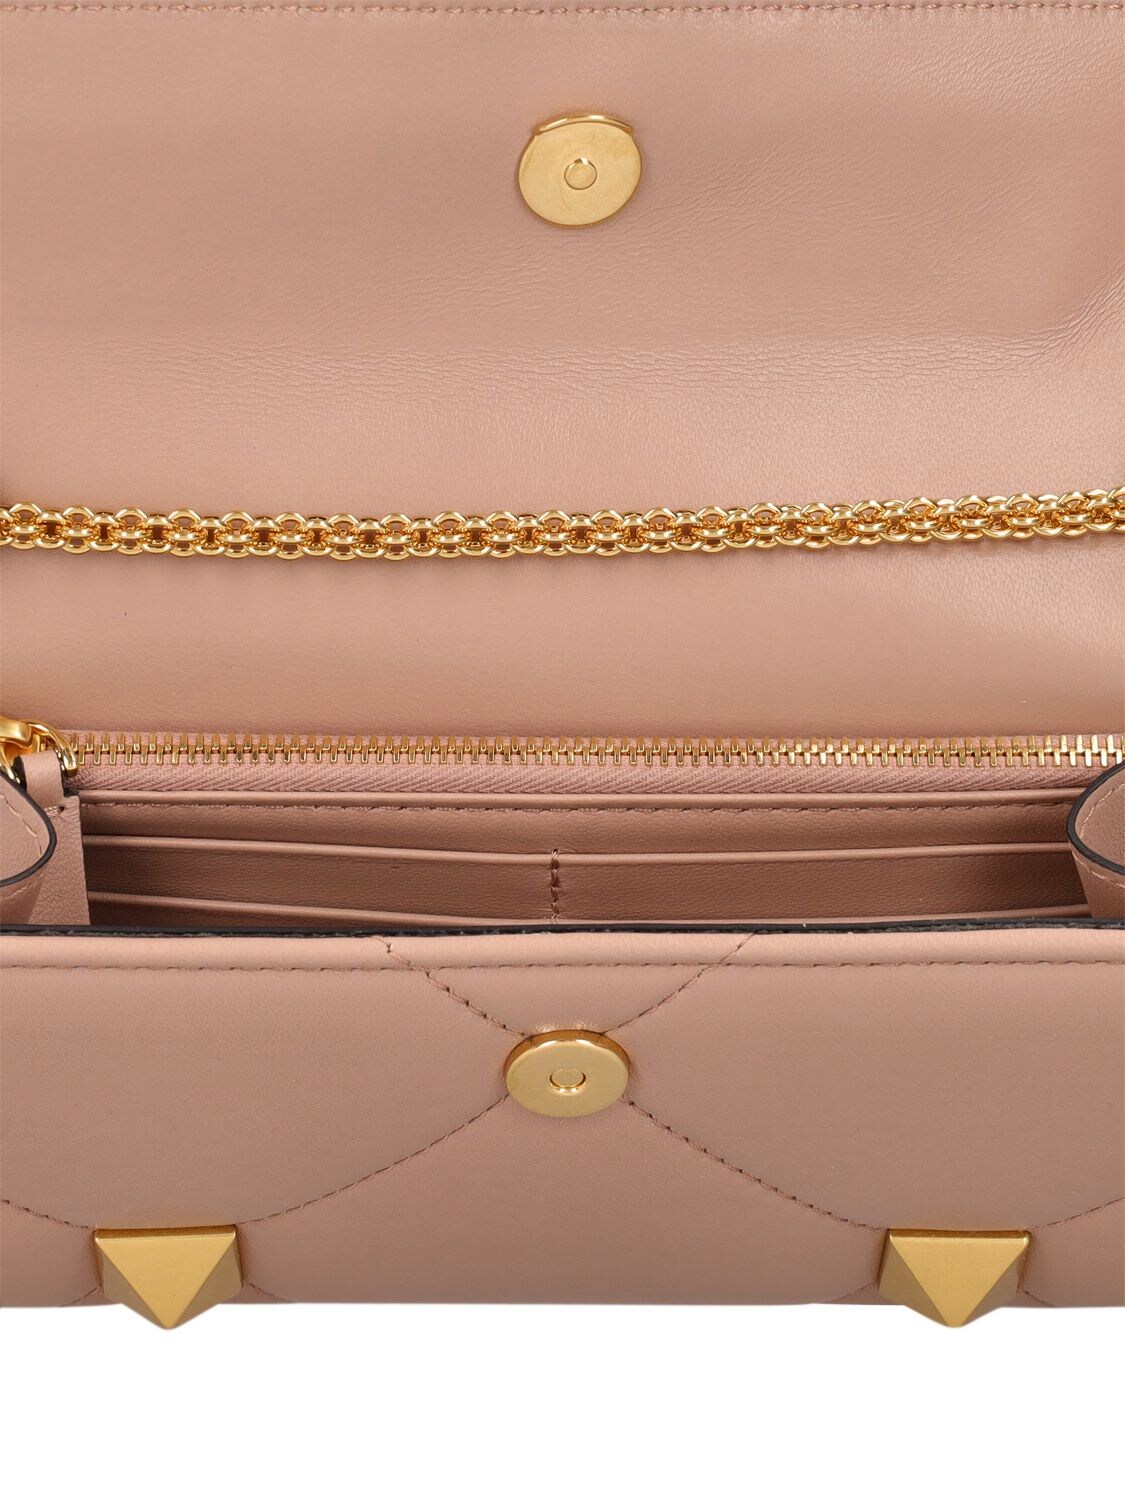 Shop Valentino Roman Stud Chain Wallet In Rose Cannelle